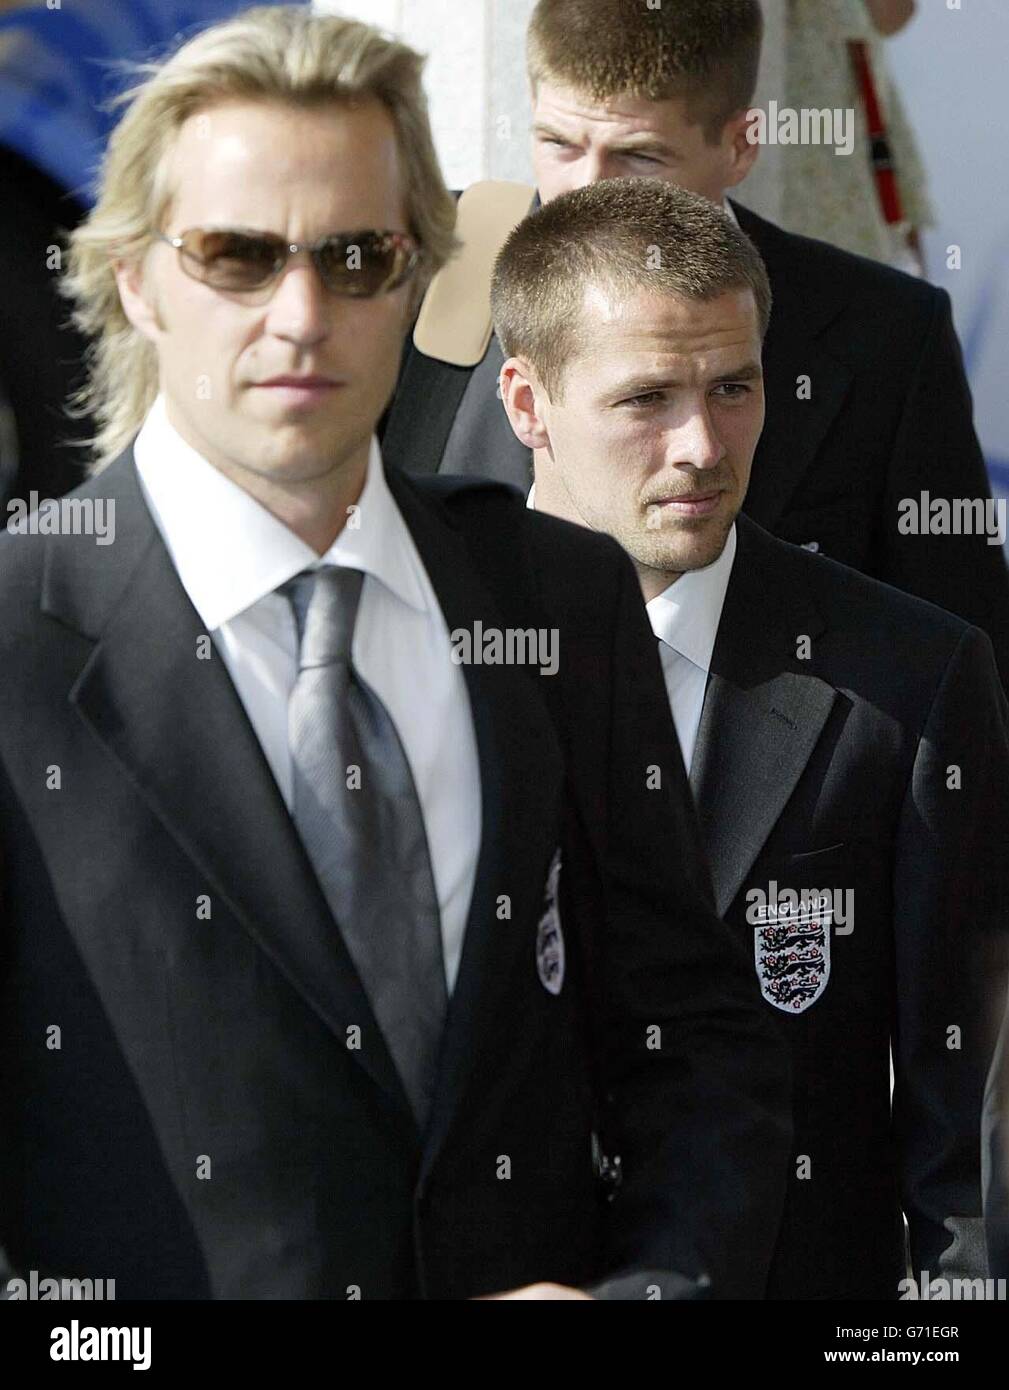 England's Michael Owen (right) and goalkeeper Ian Walker (left) arrive at the Solplay Hotel in Portugal for the Euro 2004 tournament. England will play their opening first round match against France on Sunday. Stock Photo